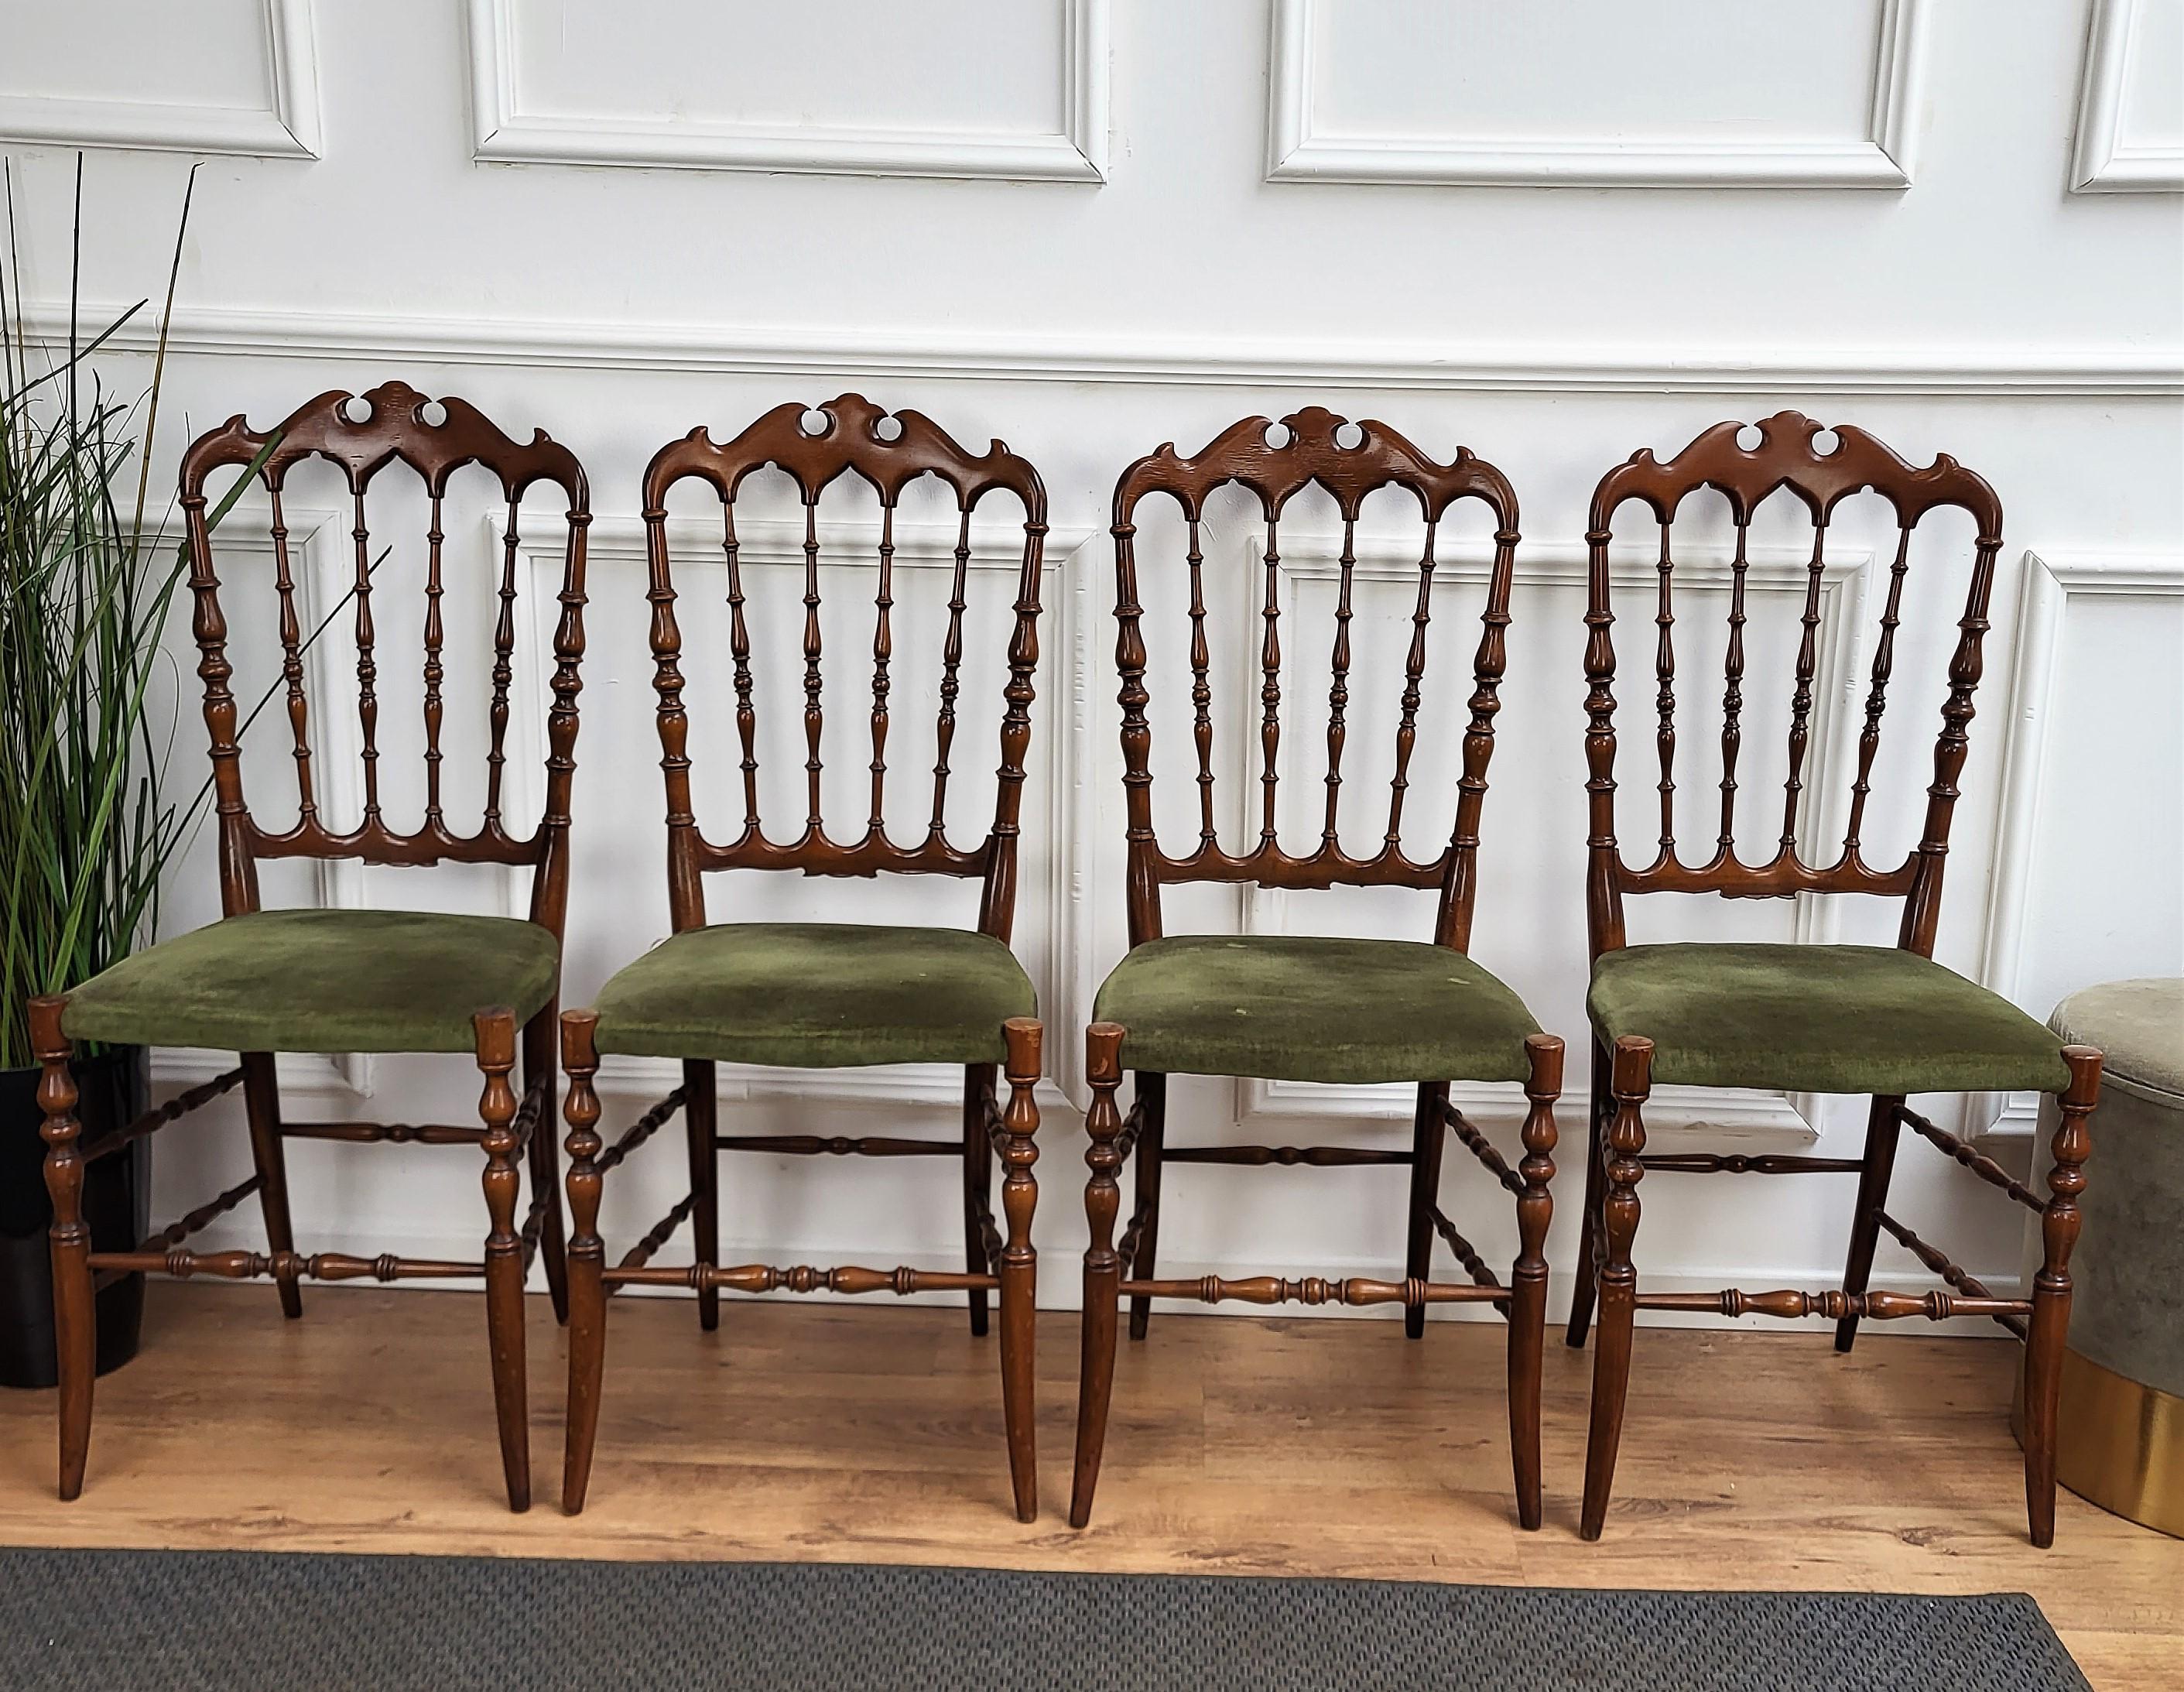 1970s Italian Chiavari chairs with great vintage patina and perfect long lasting solid structure. The actual green velvet upholstery is used and in fair condition but can easily be renewed to customers' preference.

Chiavari chairs are named after